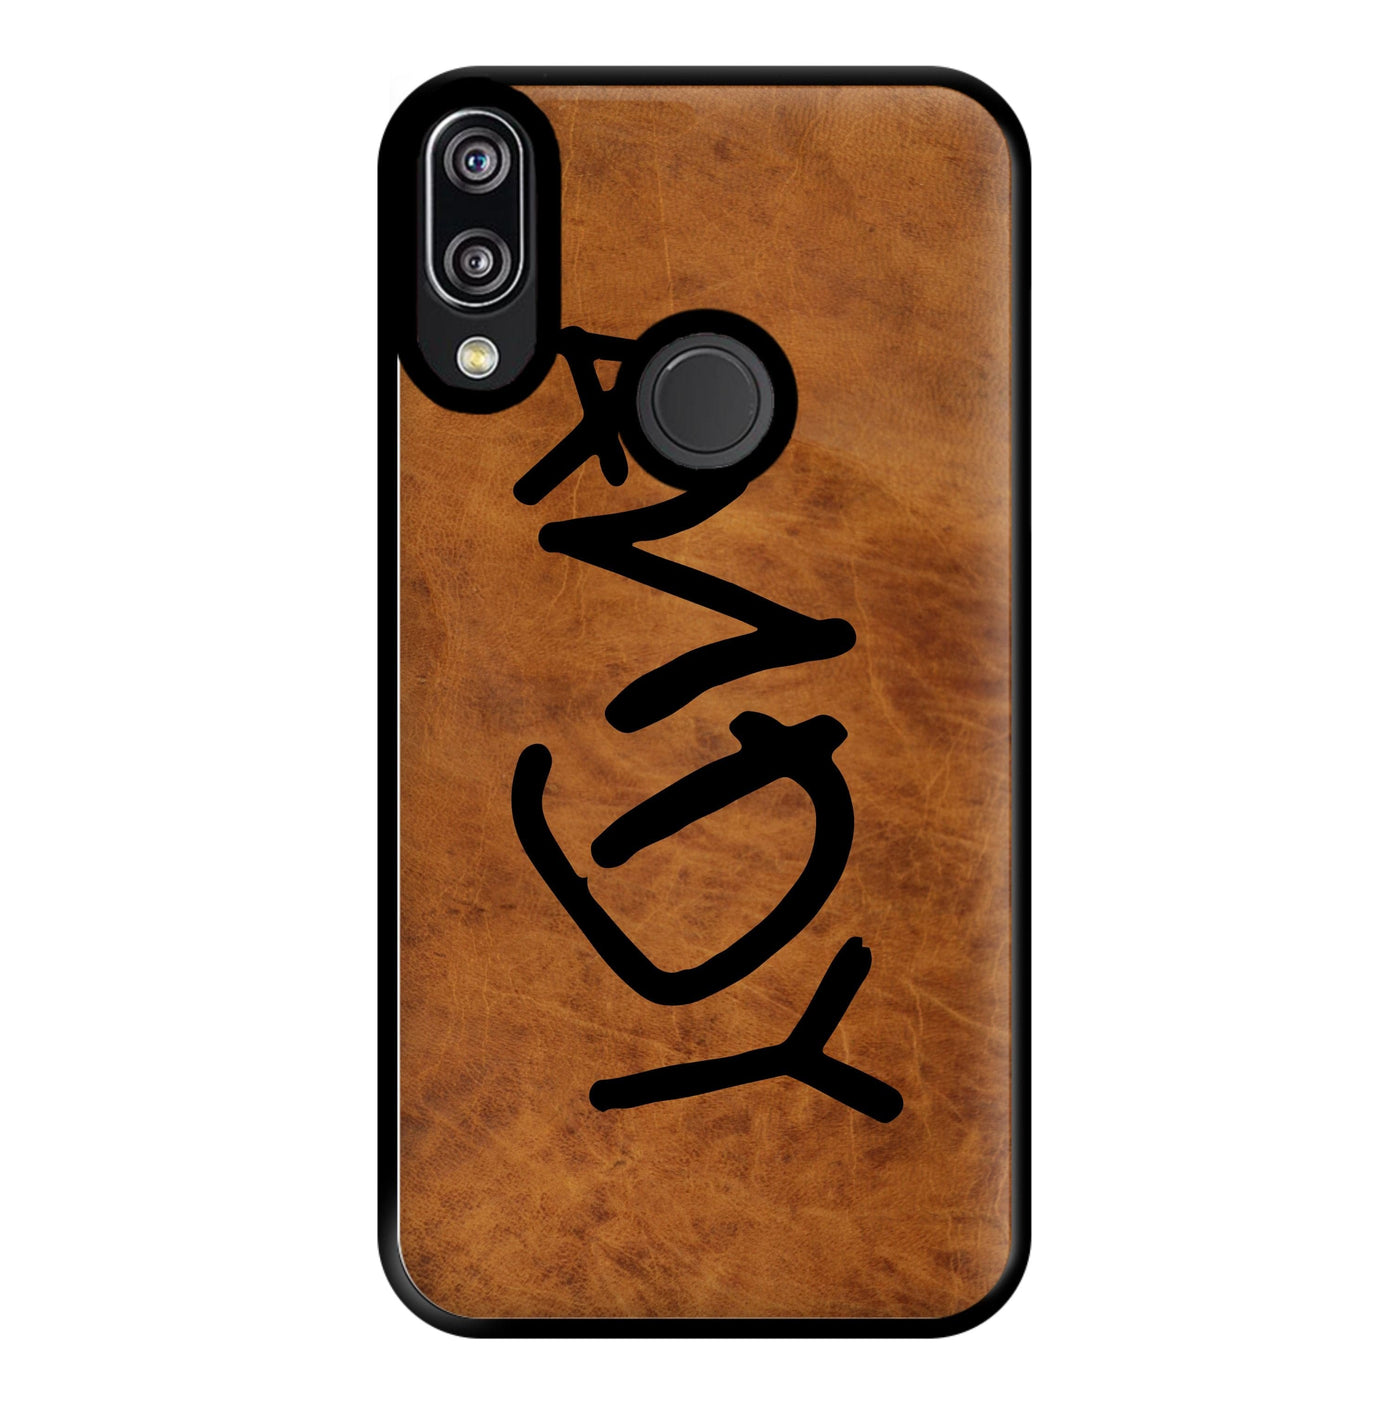 Andy Footprint - Toy Story Phone Case